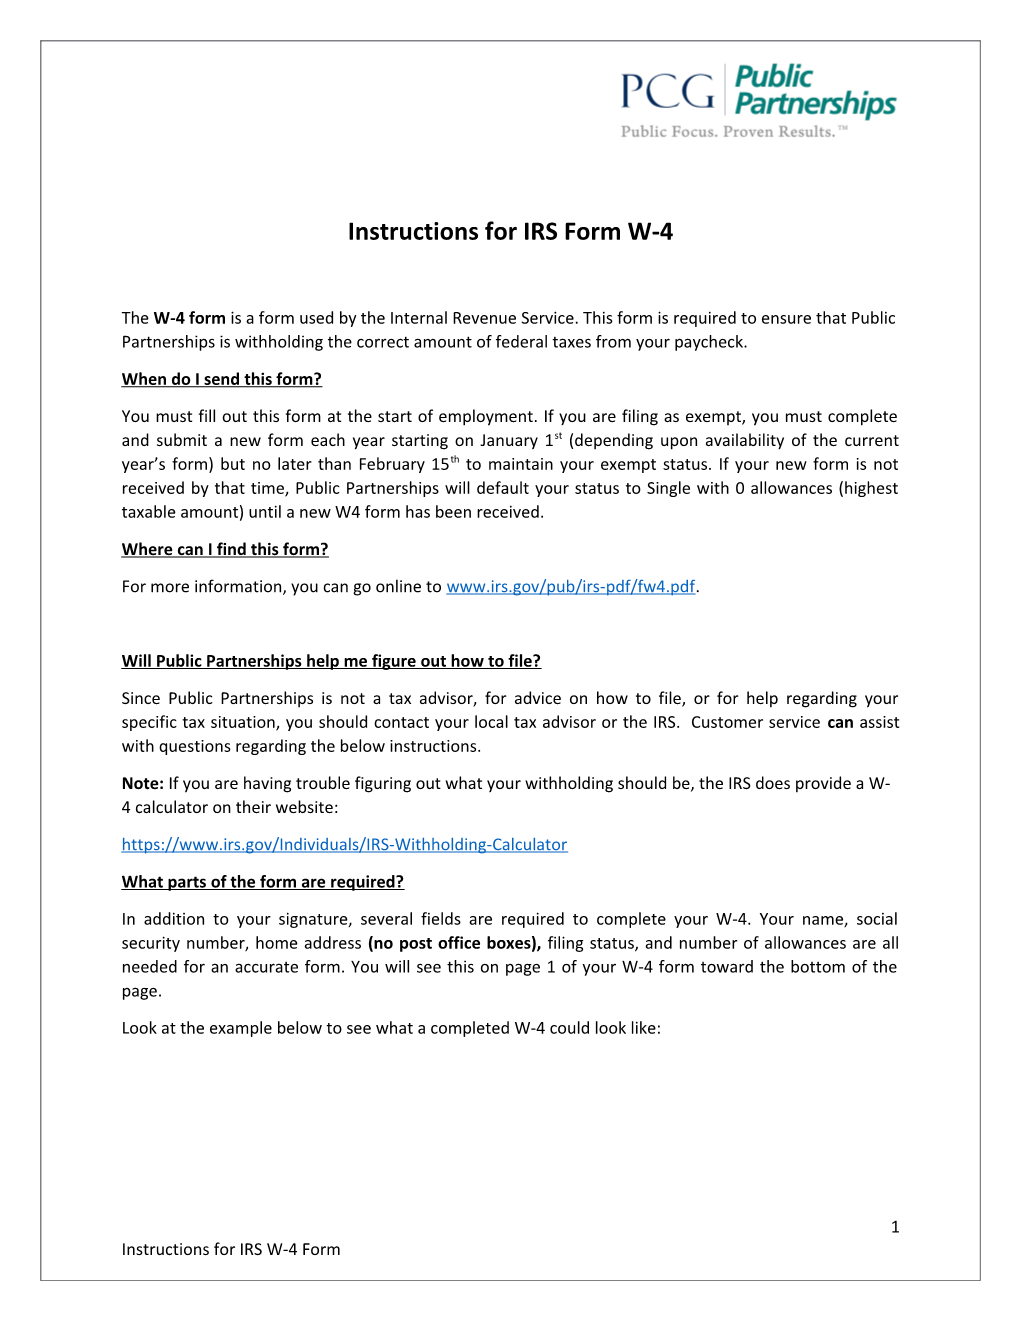 Instructions for IRS Form W-4